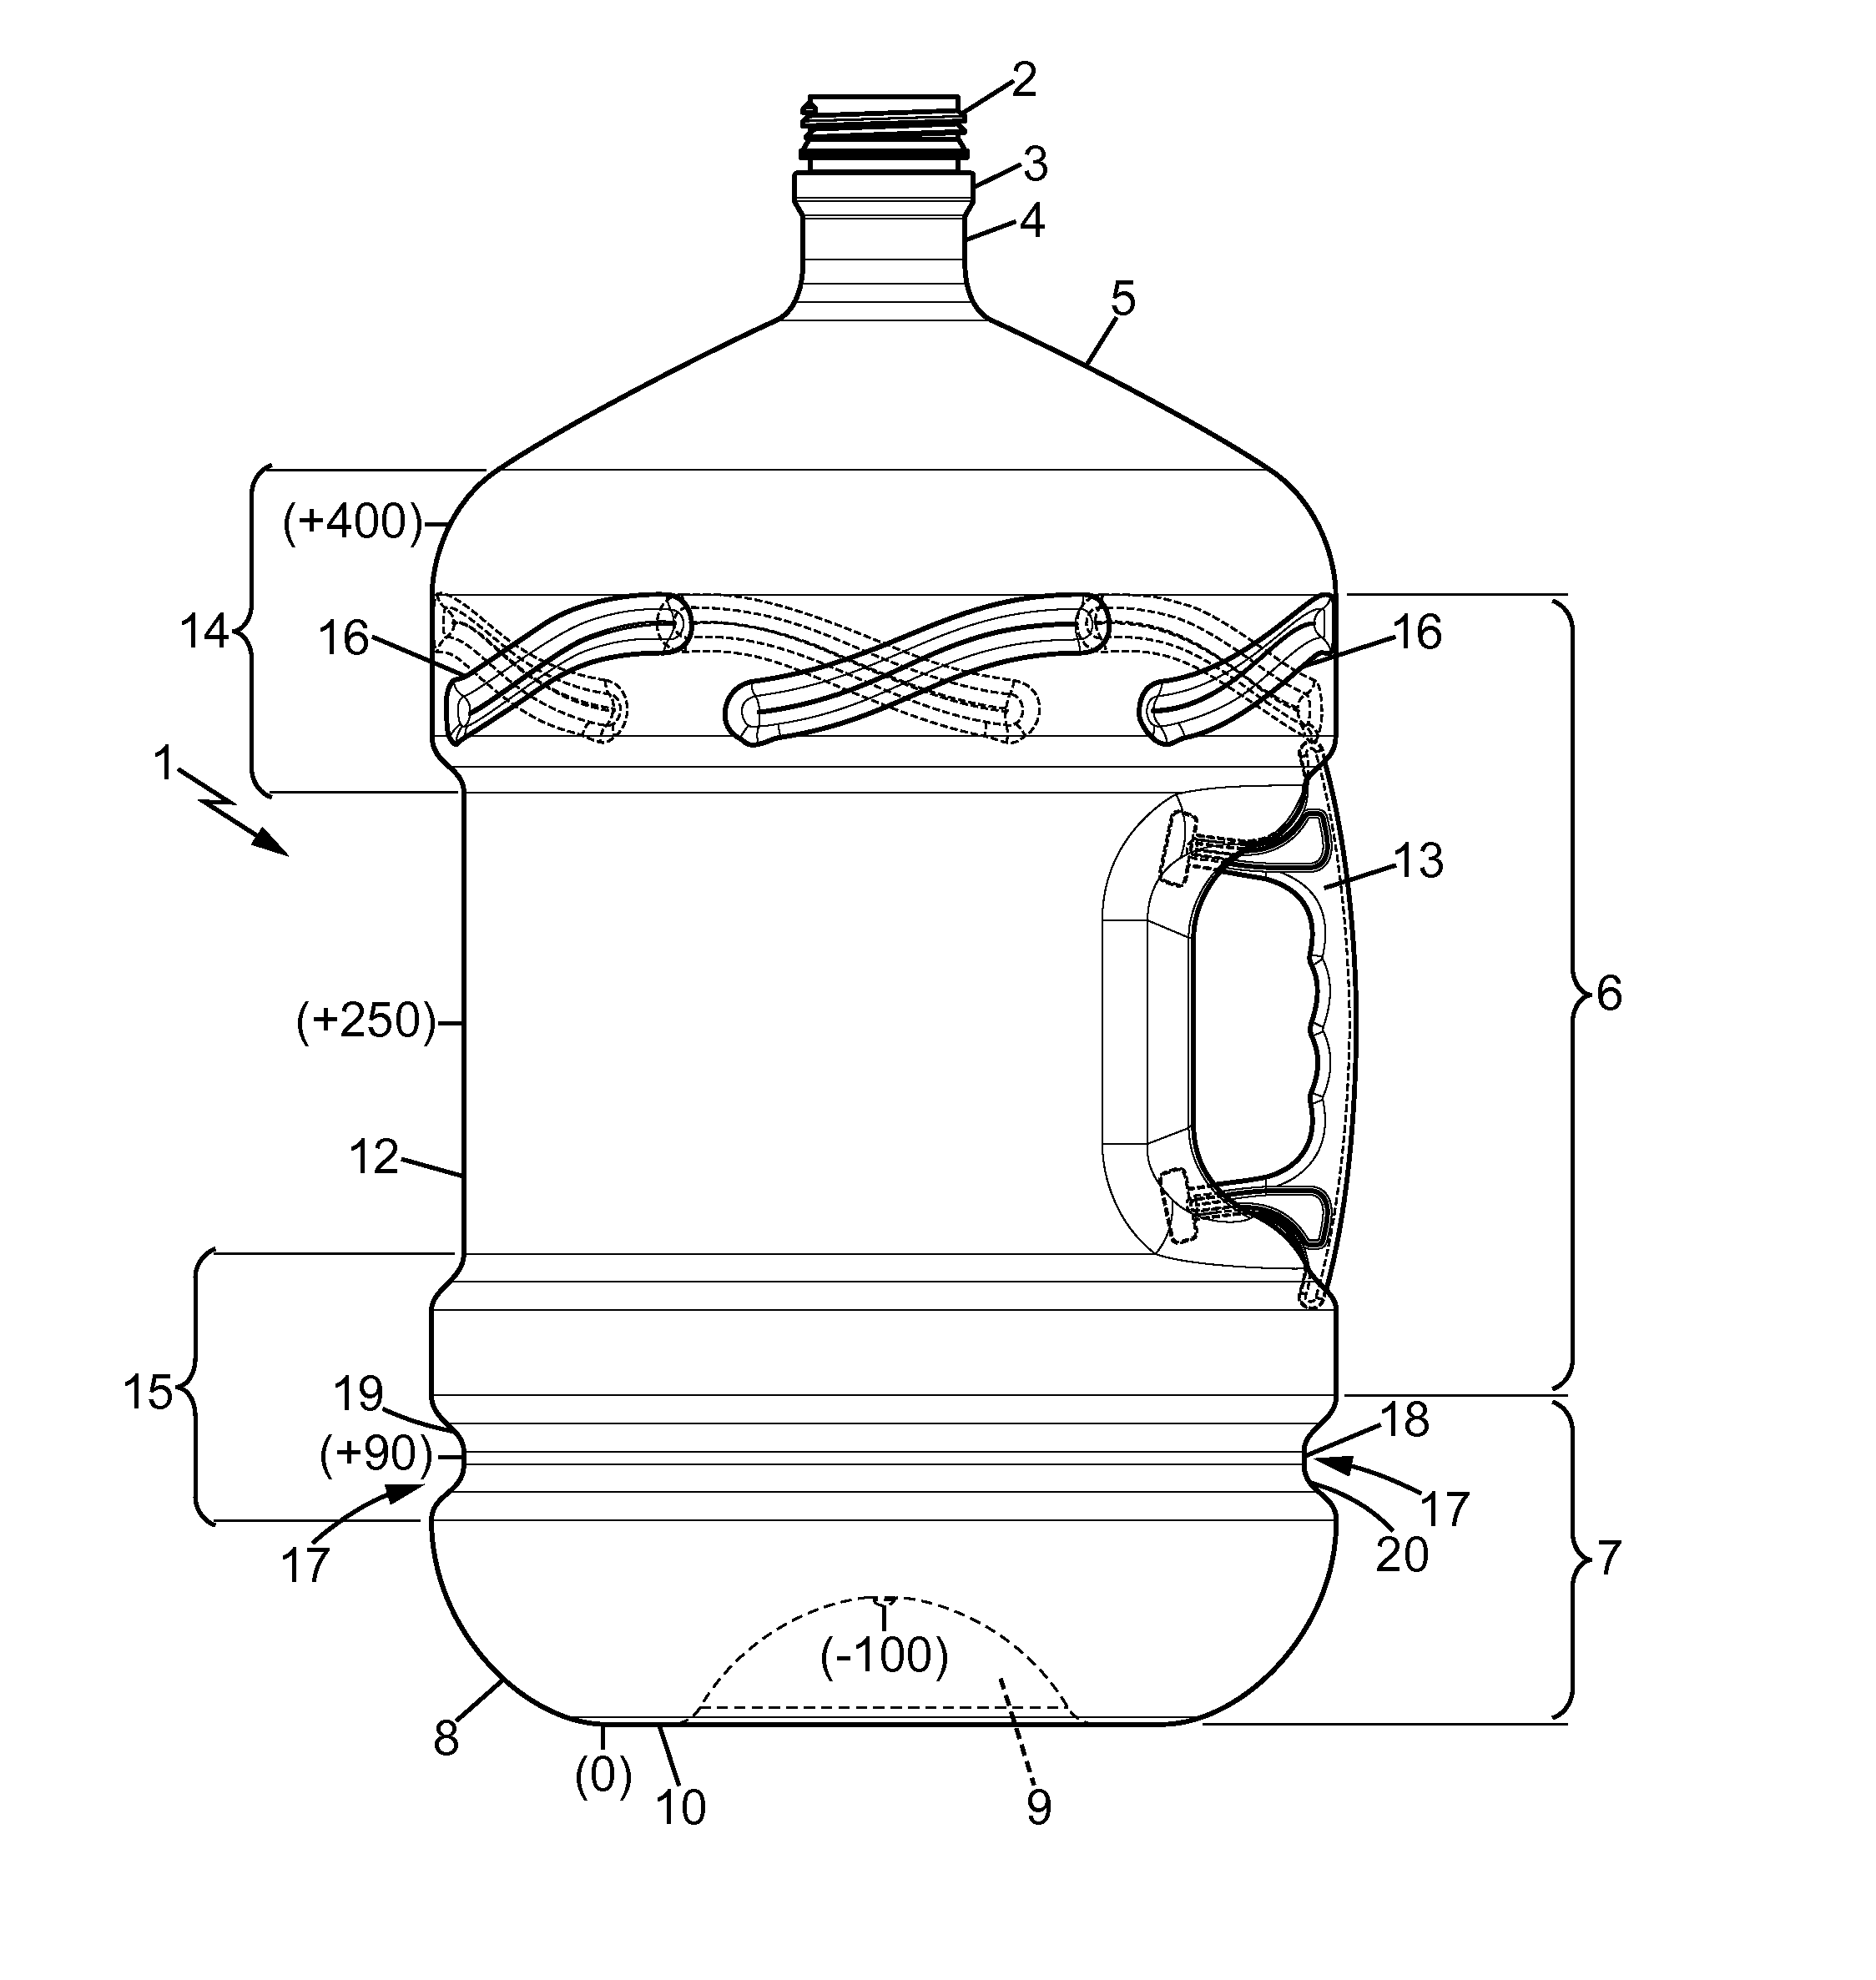 Blow Moulded Bottle, Method of Manufacturing and Mould